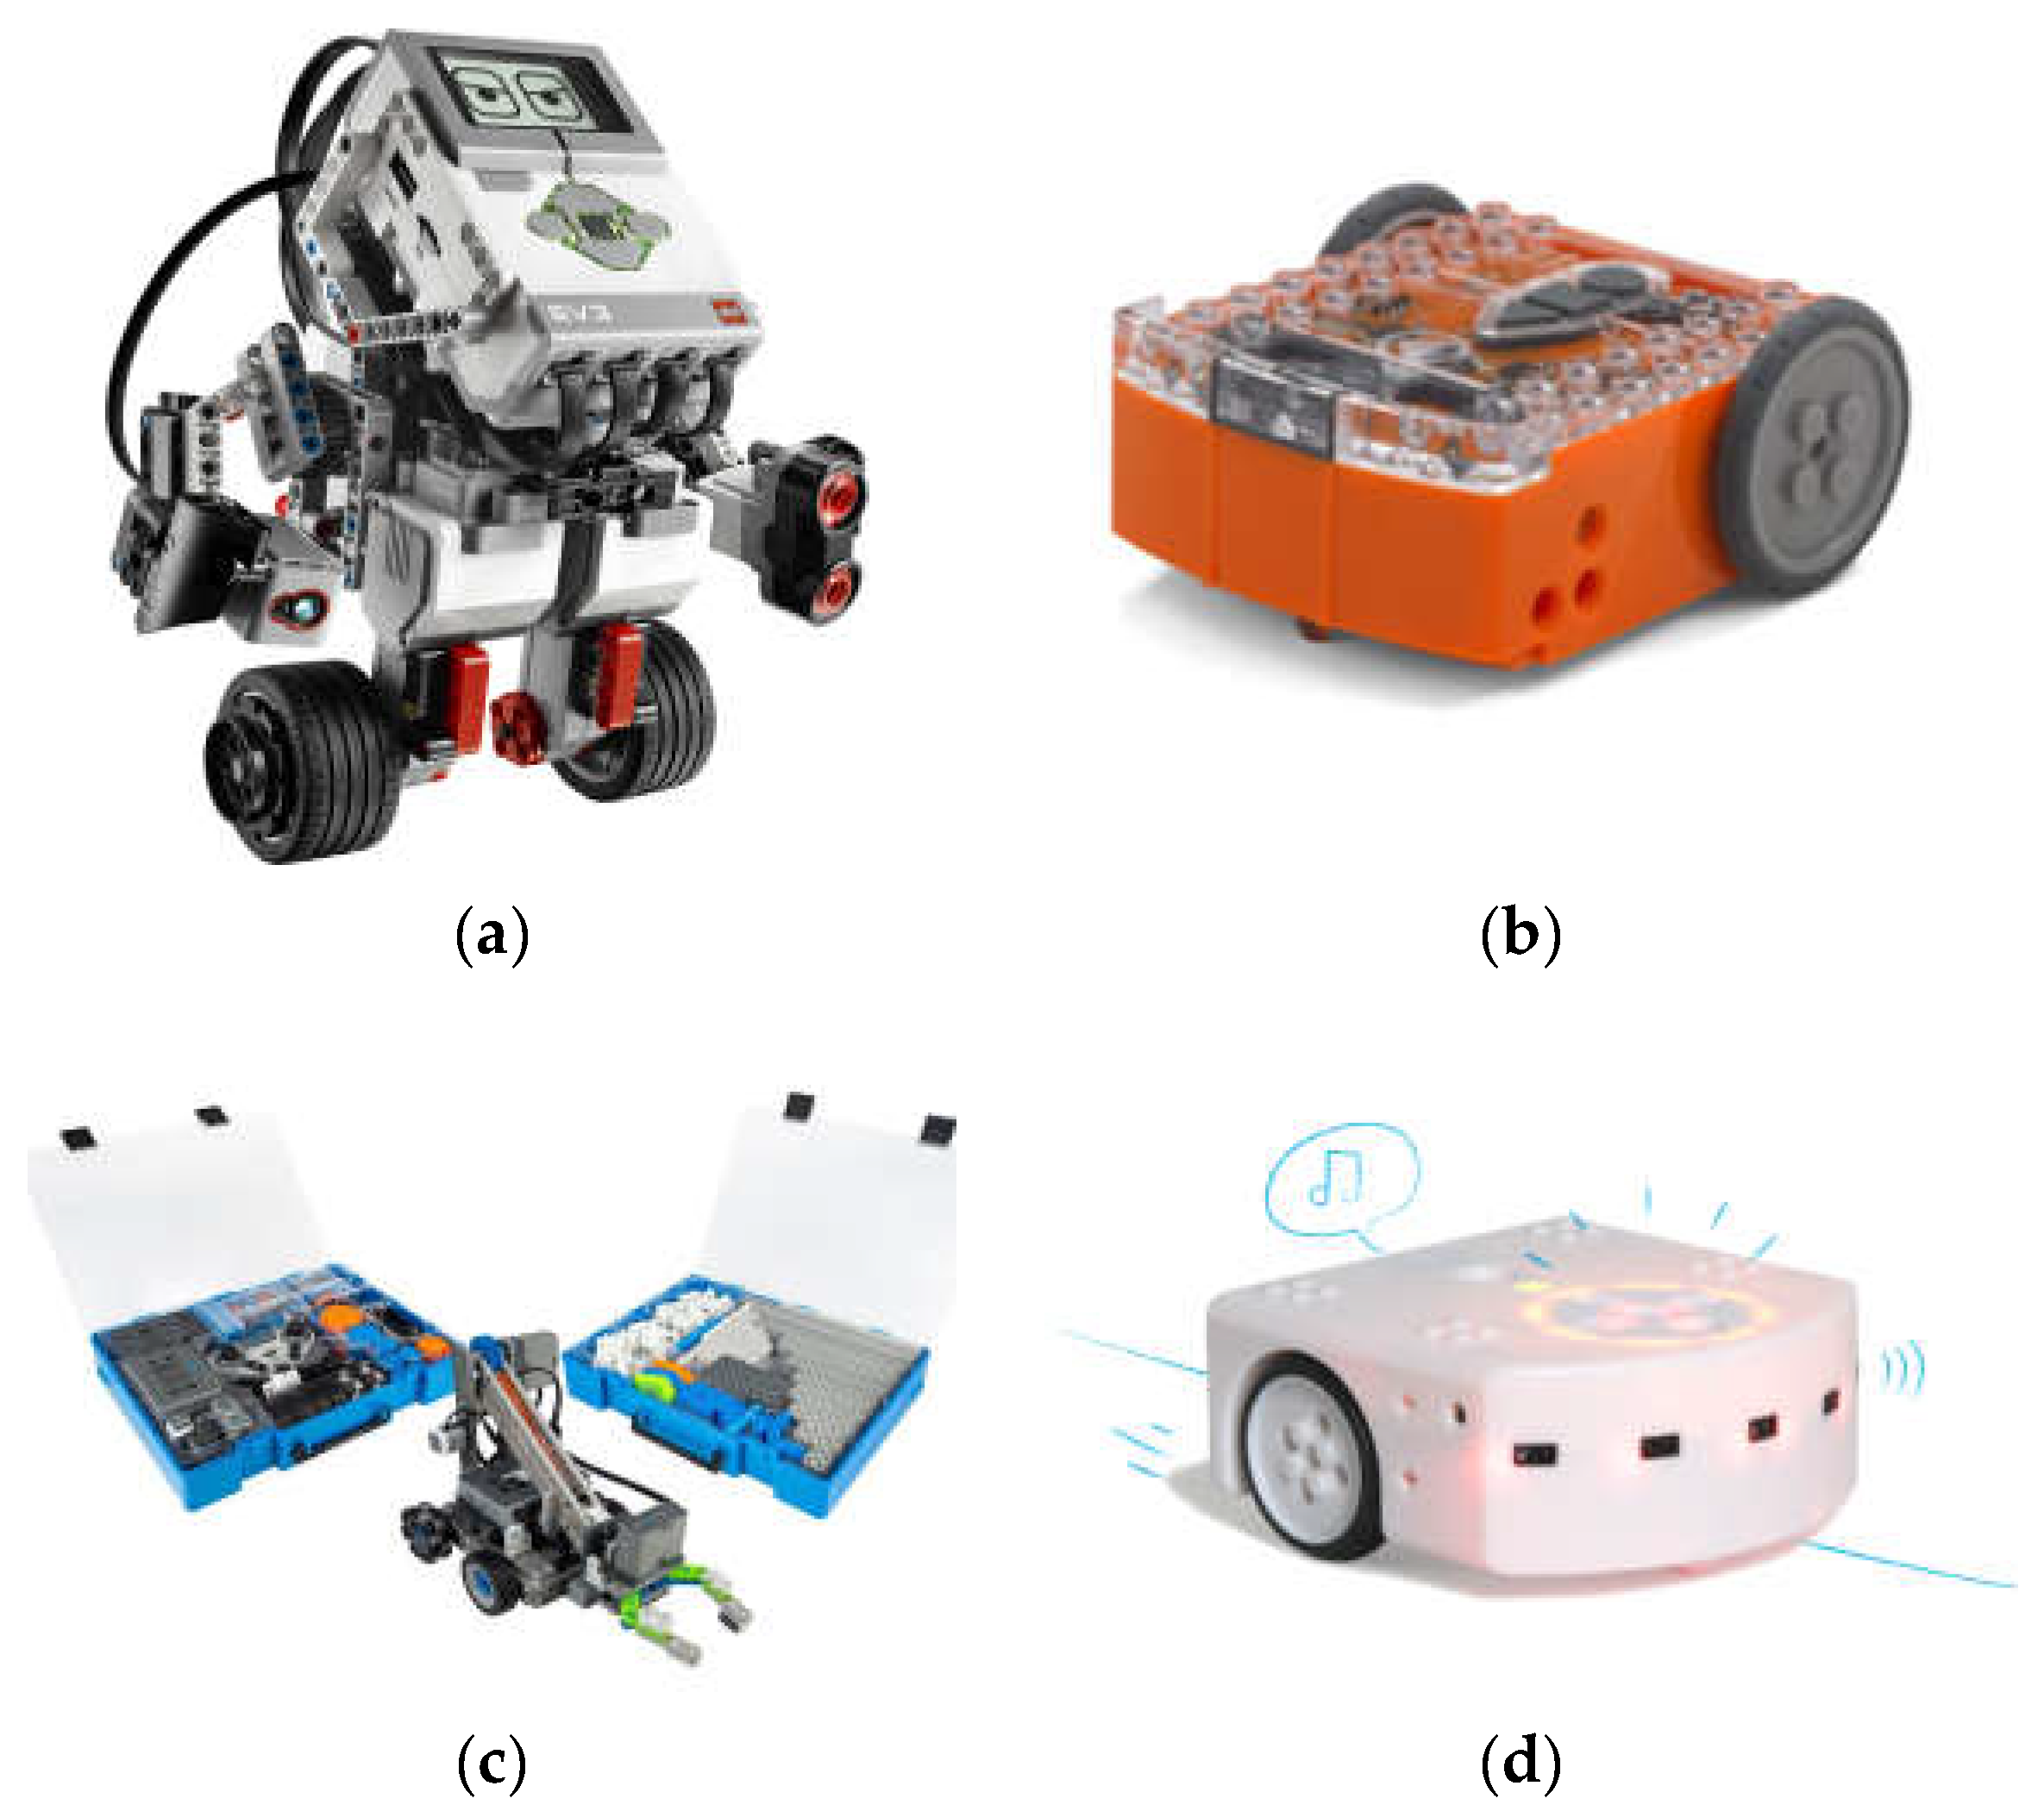 Intro to Robotics with Scratch (Ages 8-11)